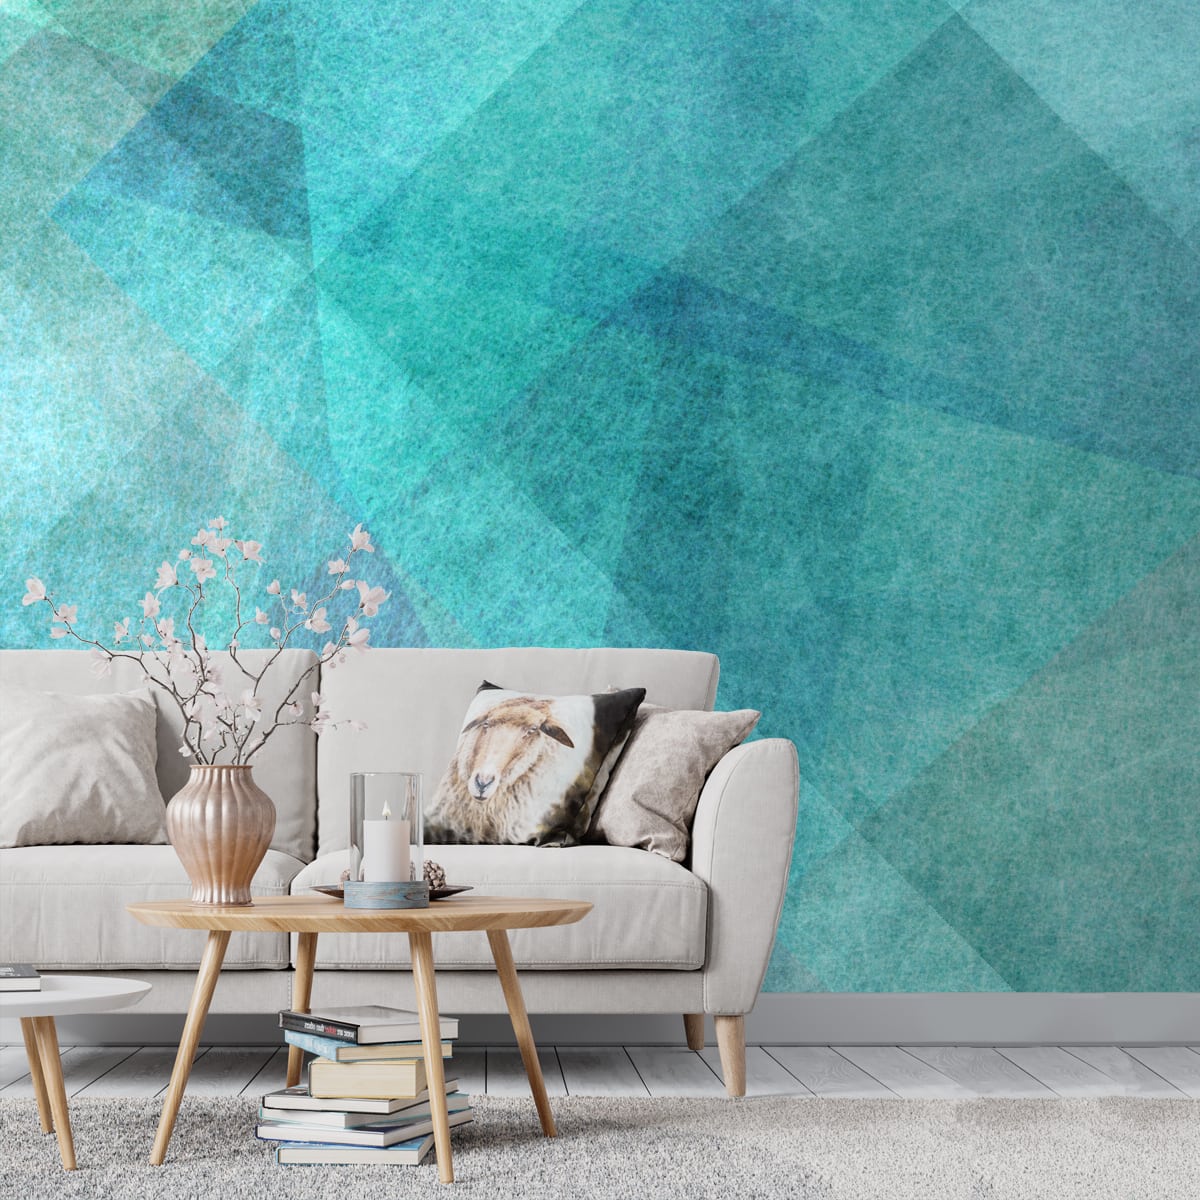 Green and Blue Geometric Shapes, Wallpaper for Walls | lifencolors ...